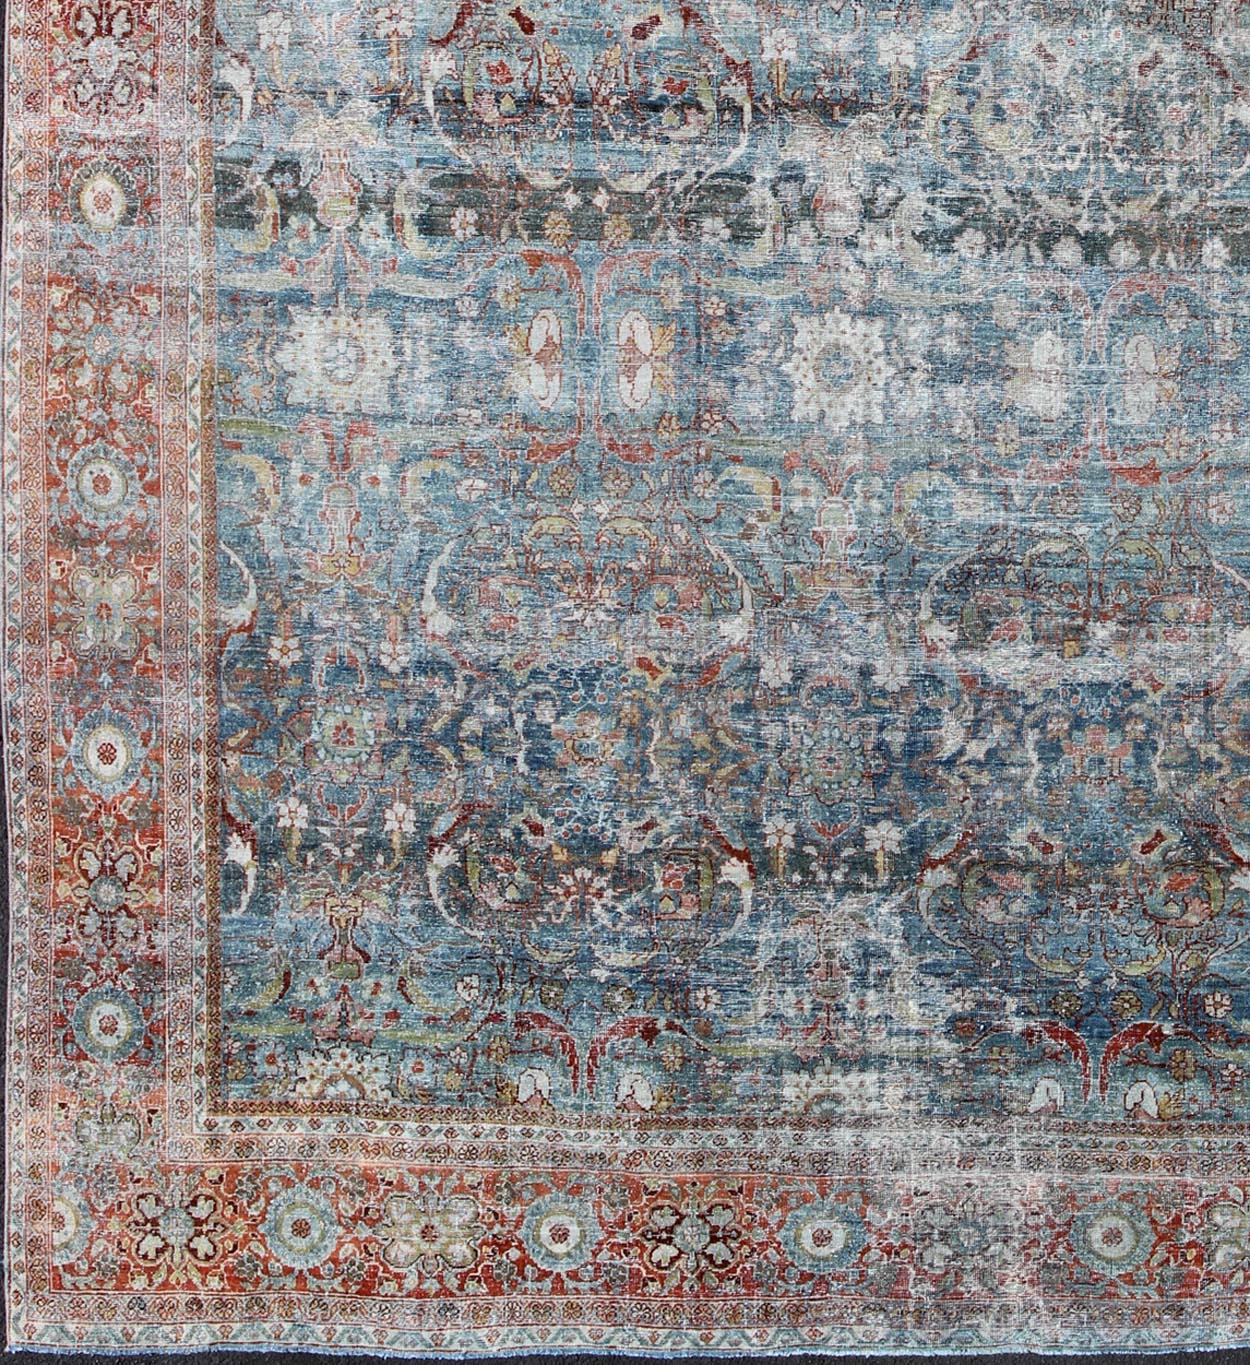 Antique Persian Sultanabad Mahal rug with geo-floral design in blue green and red, rug ema-7522, country of origin / type: Iran / Sultanabad Mahal, circa 1910.

This beautiful and large antique Persian Sultanabad rug displays a gorgeous, all-over